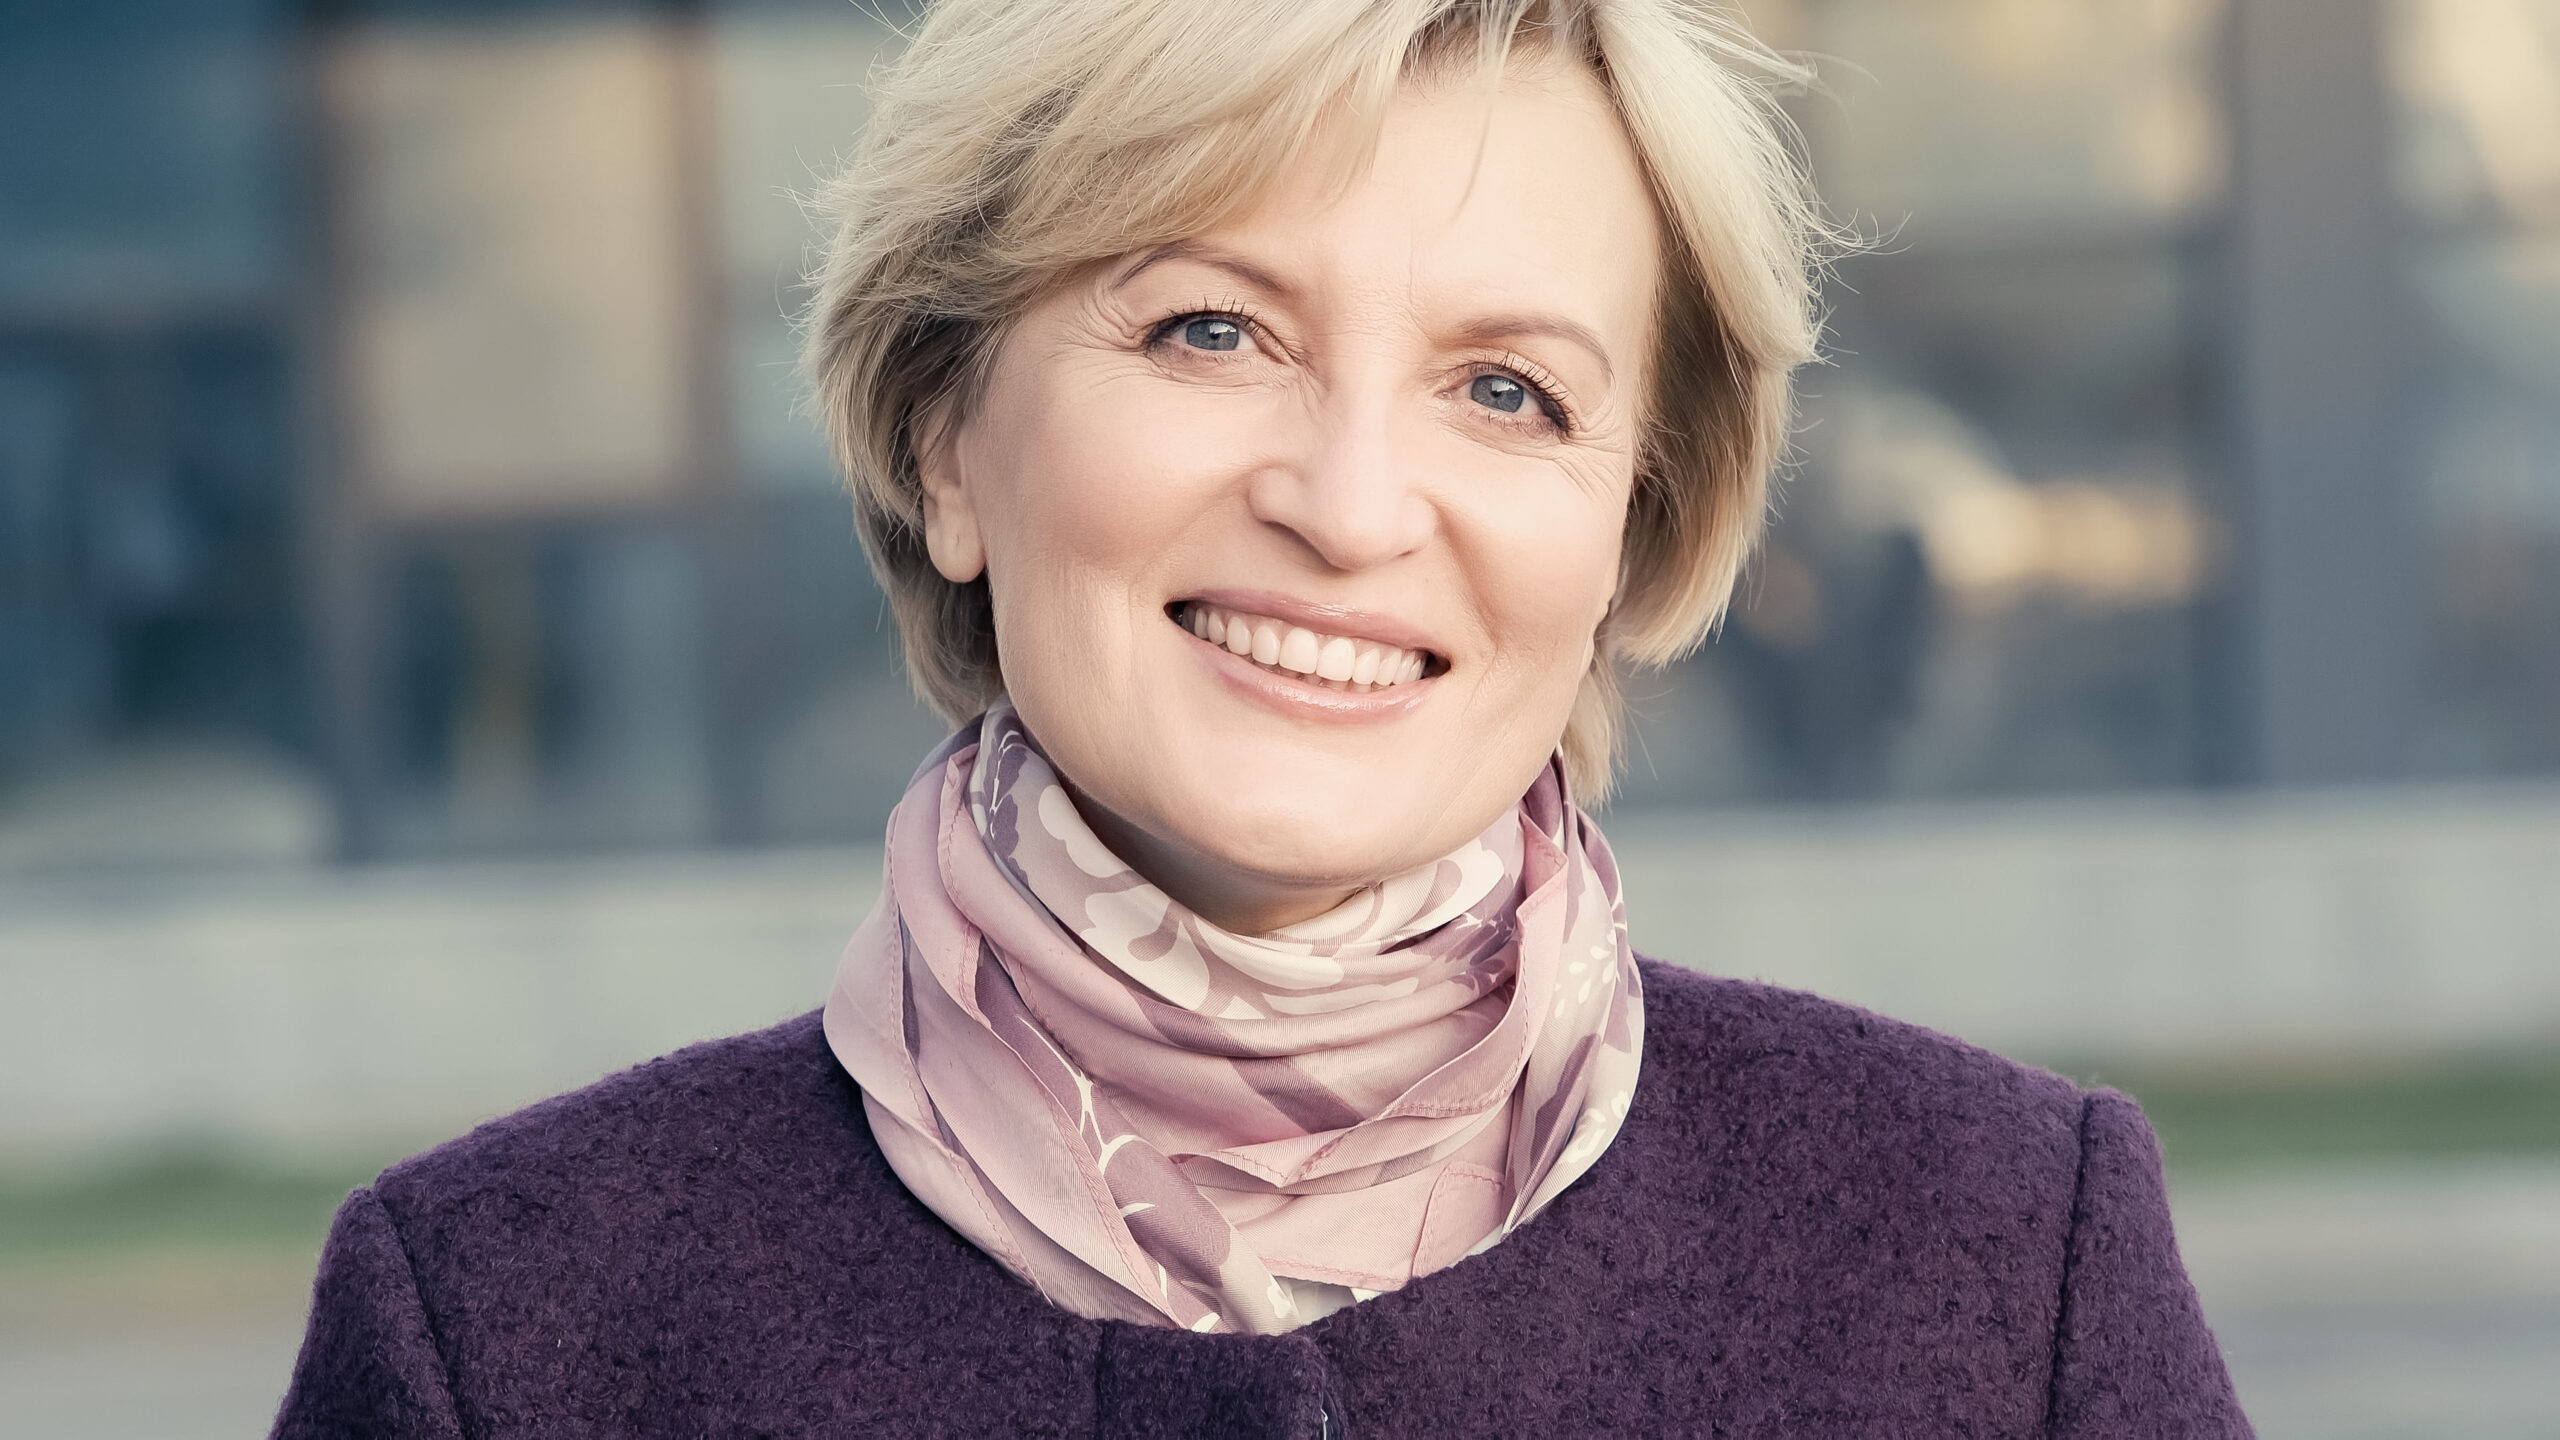 smiling middle aged woman in neckerchief looking at camera outdoors,stock image